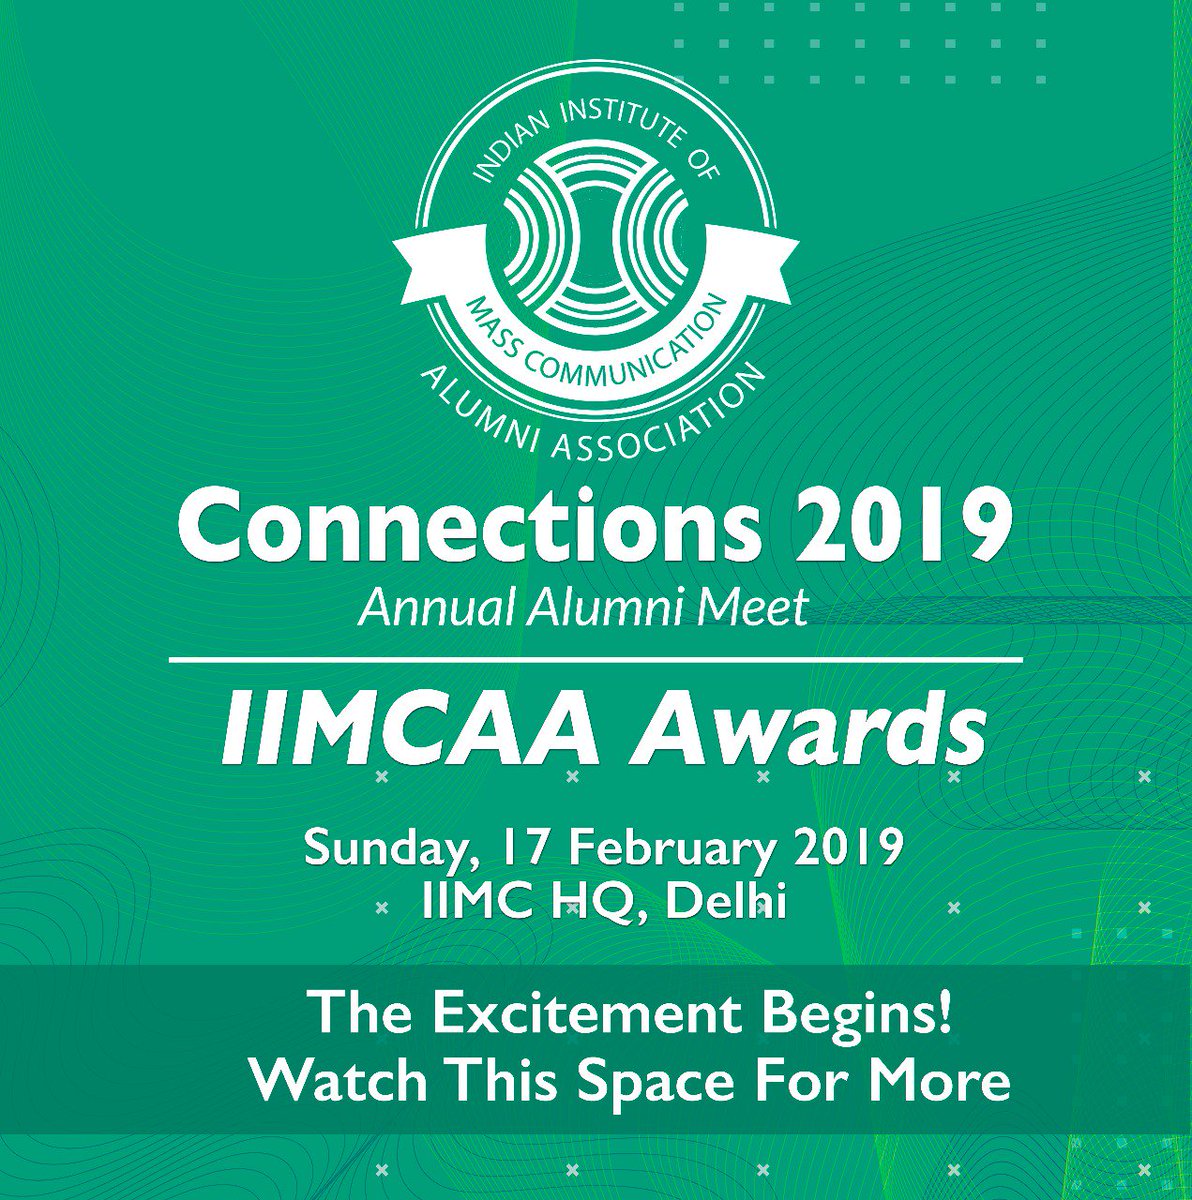 IIMC Alumni Association @IIMCAA  invites Alumni #Authors to display and sell their books at #IIMCAA Book Fair 2019 at #Connections2019. IIMCAA will provide stall space only. Interested alumni must register latest by 15 Feb. 2019, 5:00 PM. Email to: alumni.iimc@gmail.com